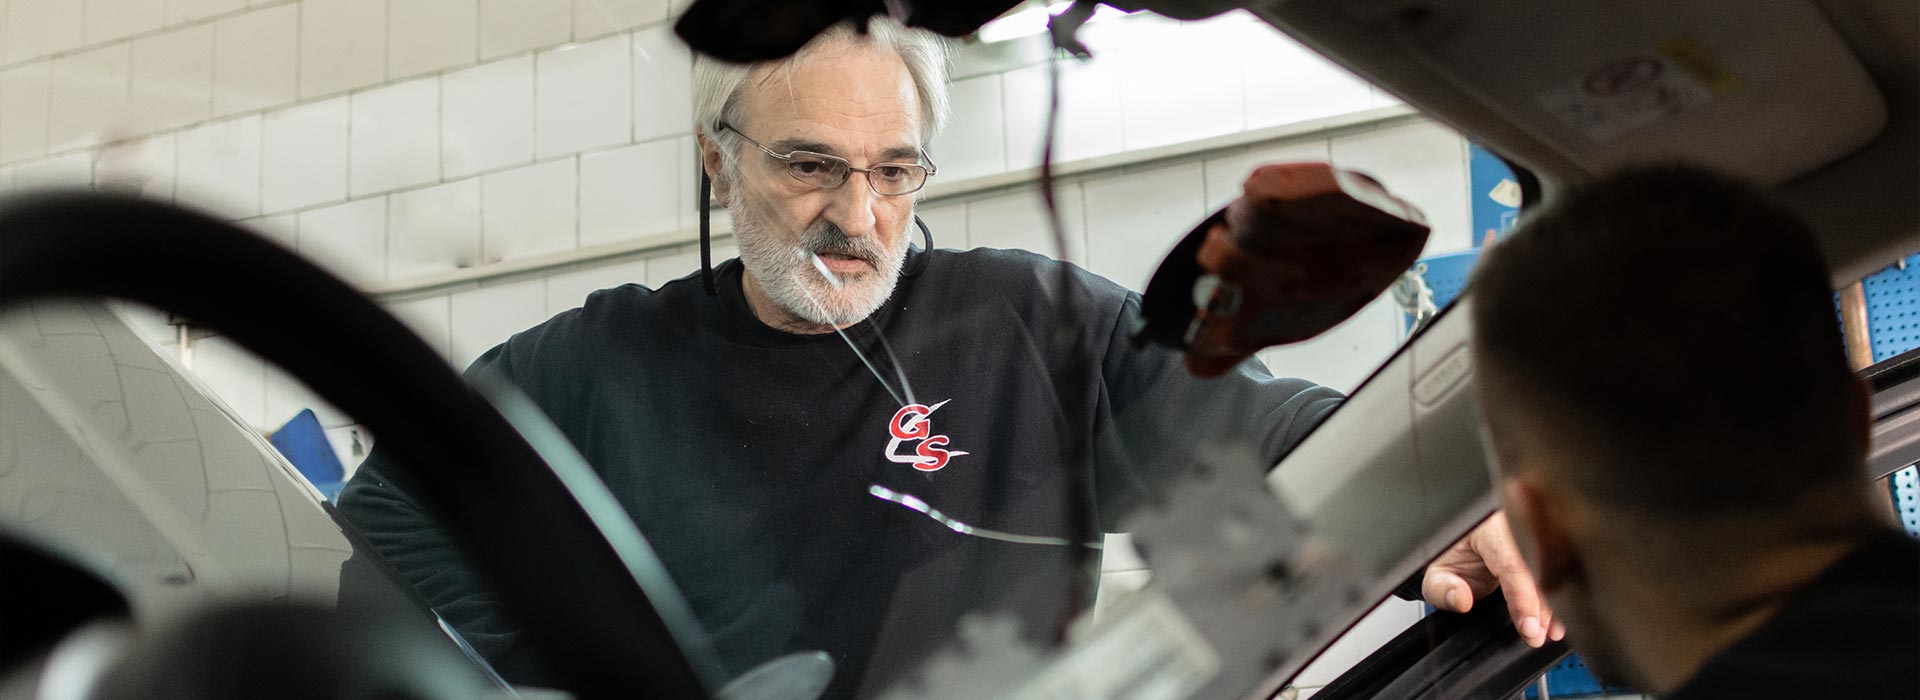 Glass Service Windshield | Let the professionals do the glass replacement